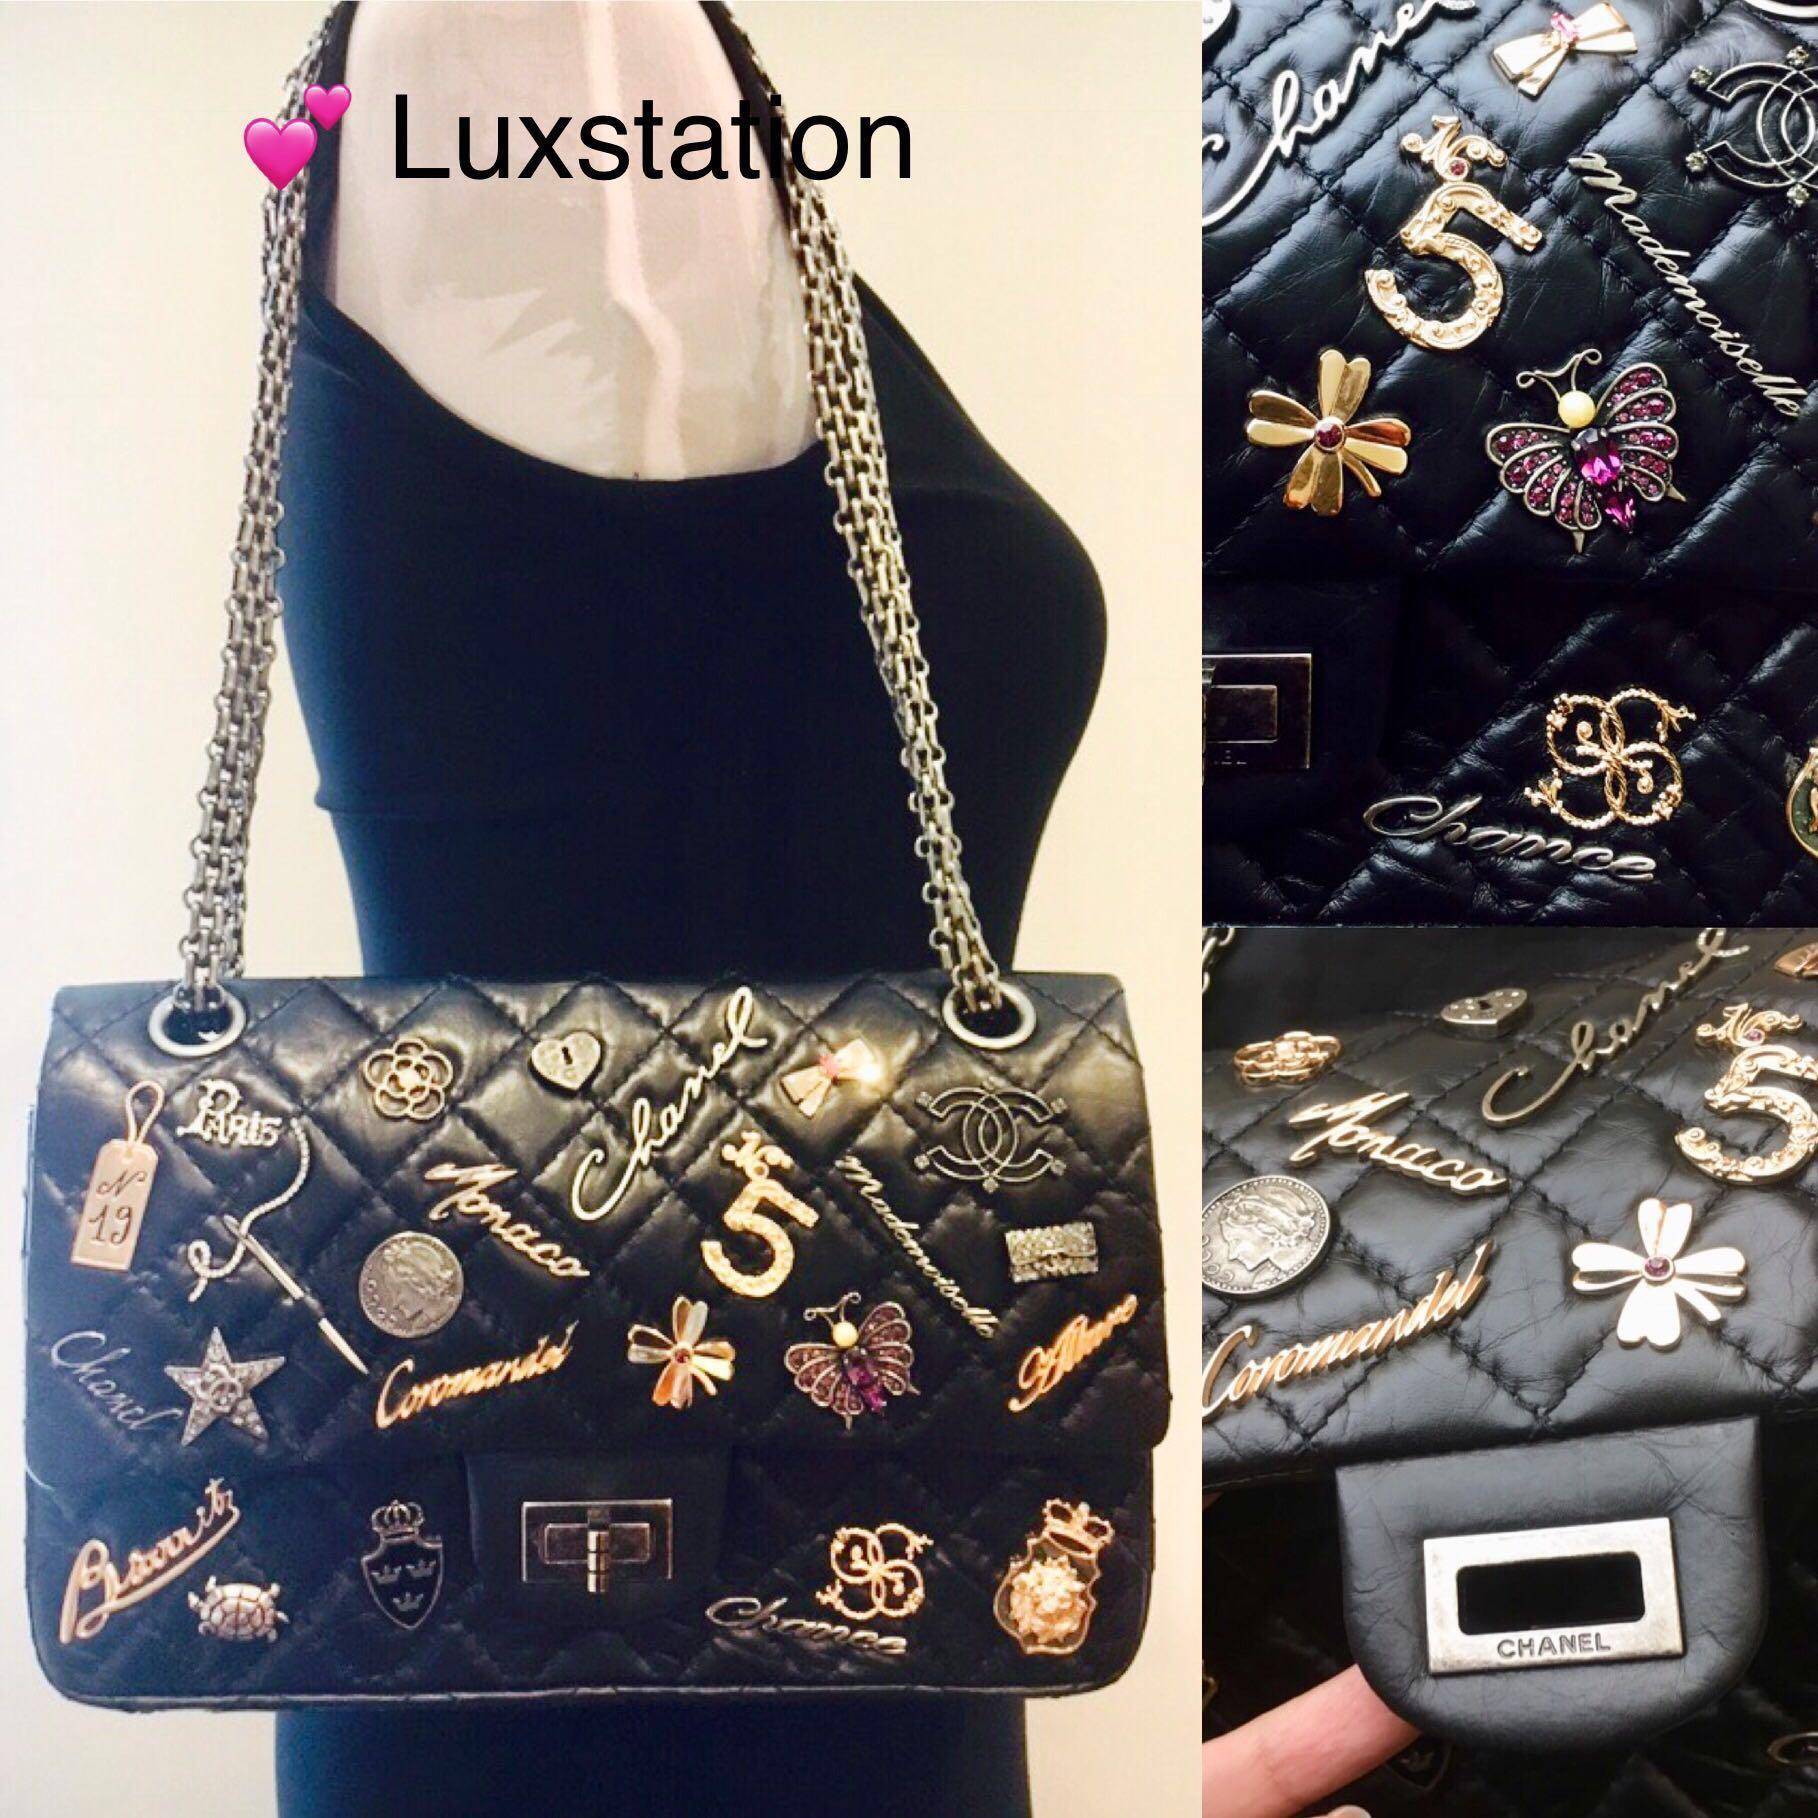 Chanel Lucky Charms Reissue 2.55 Flap Bag Quilted Aged Calfskin 225 Black  1263701